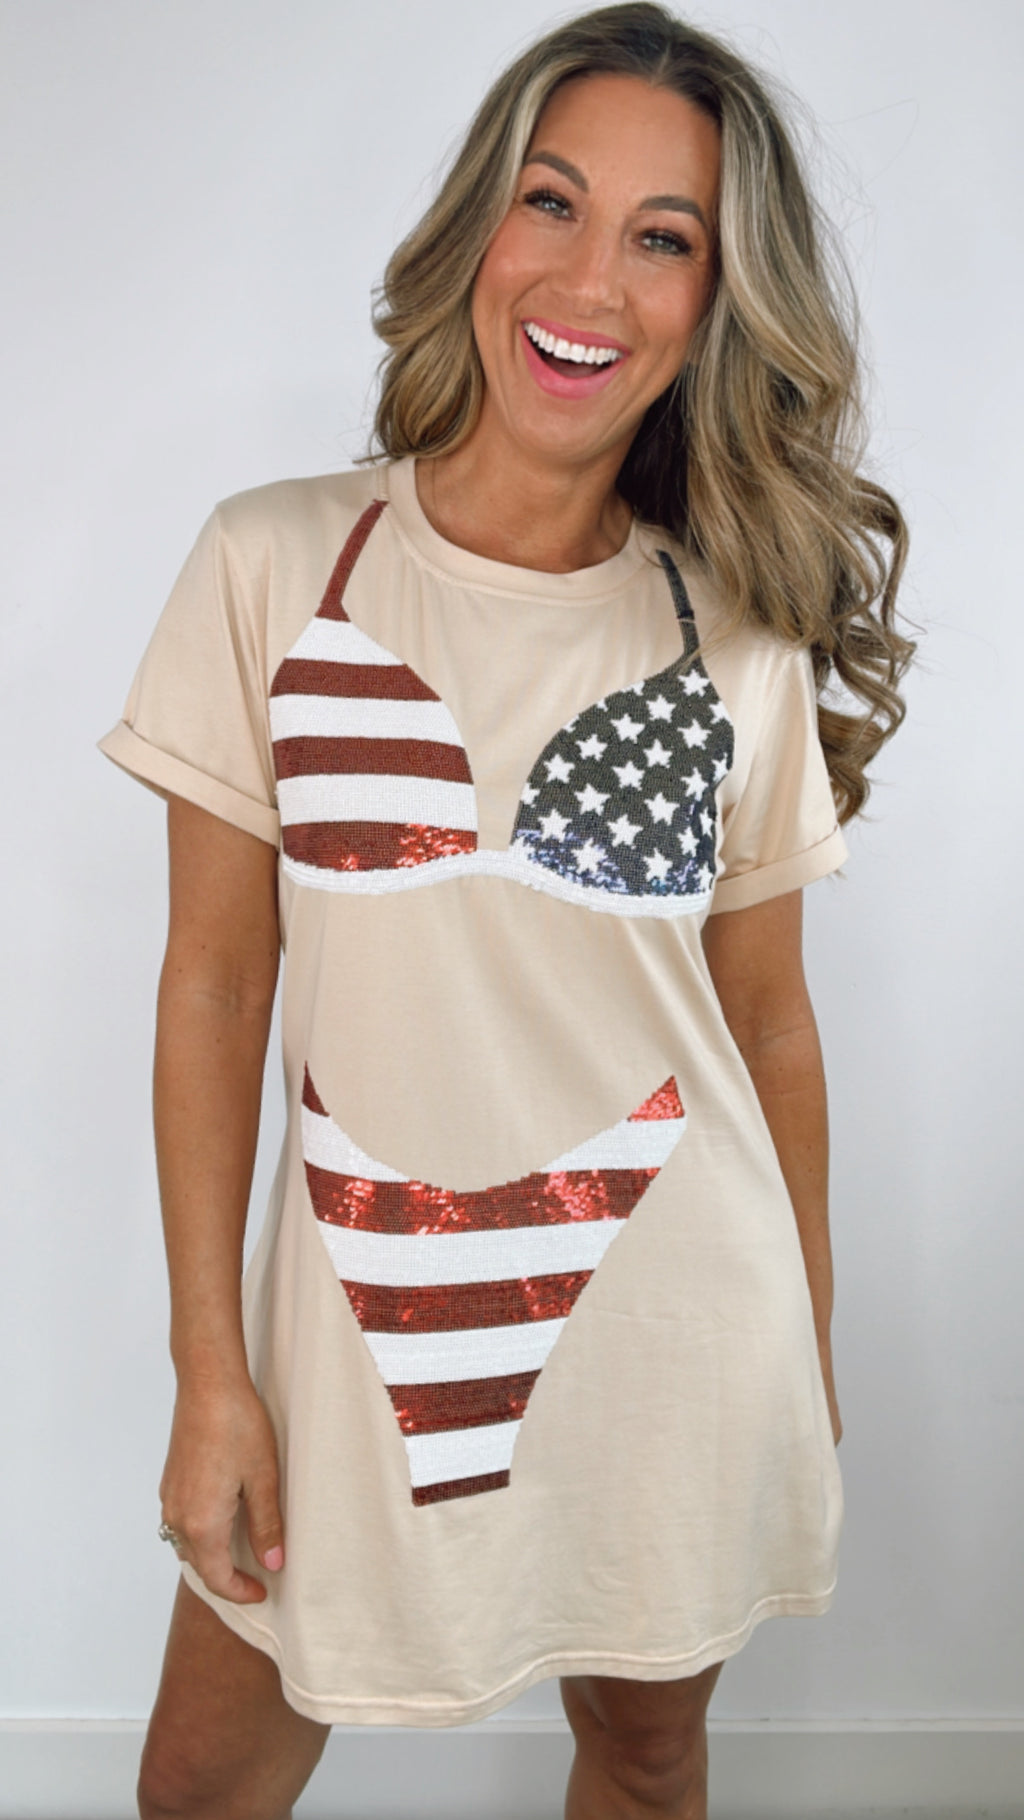 Queen of Sparkles Nude Stars and Stripes Bikini Coverup